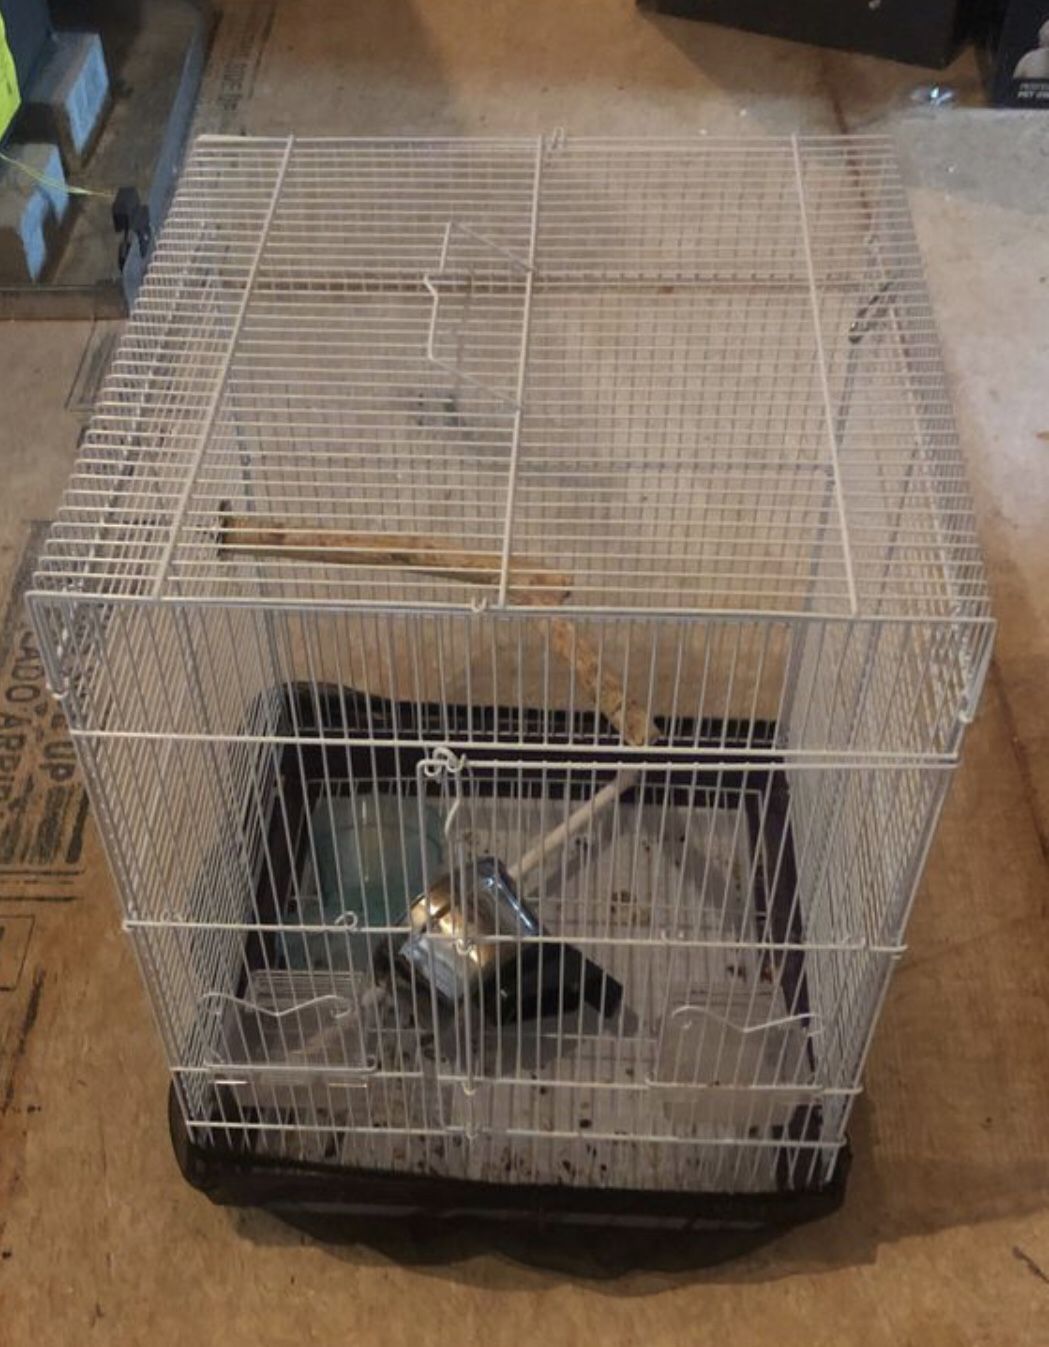 Bird cage - medium size for up to a parrot